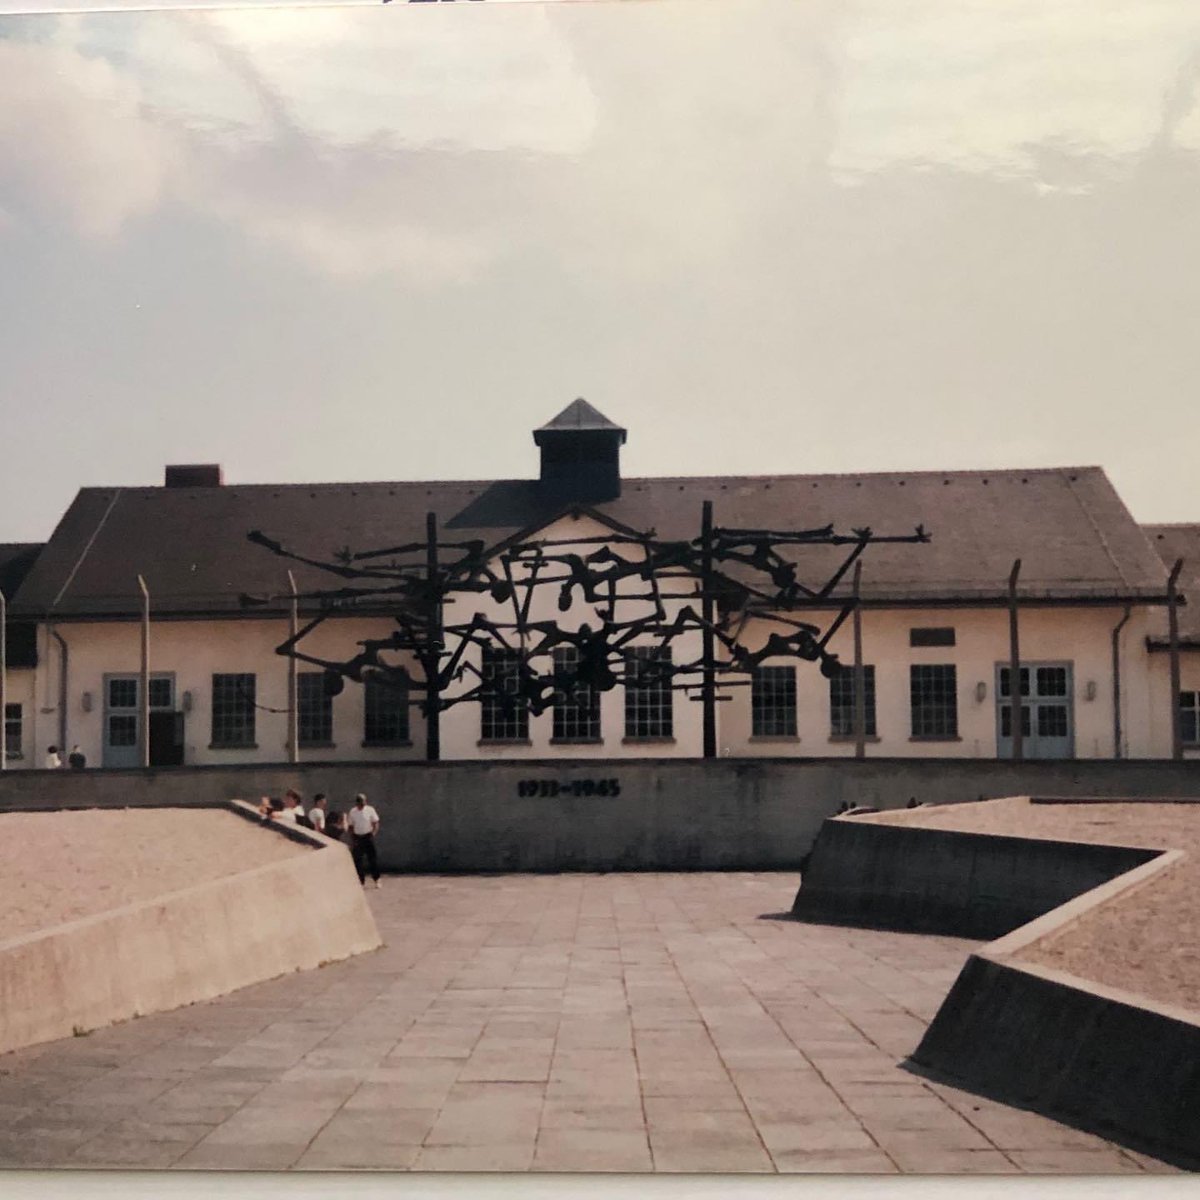 I took these photos circa summer 1996 at Dachau concentration camp, a place EVERYONE should visit in their lifetime
#HolocaustRemembranceDay #NeverAgain #WeRemember #HolocaustEducation 💙